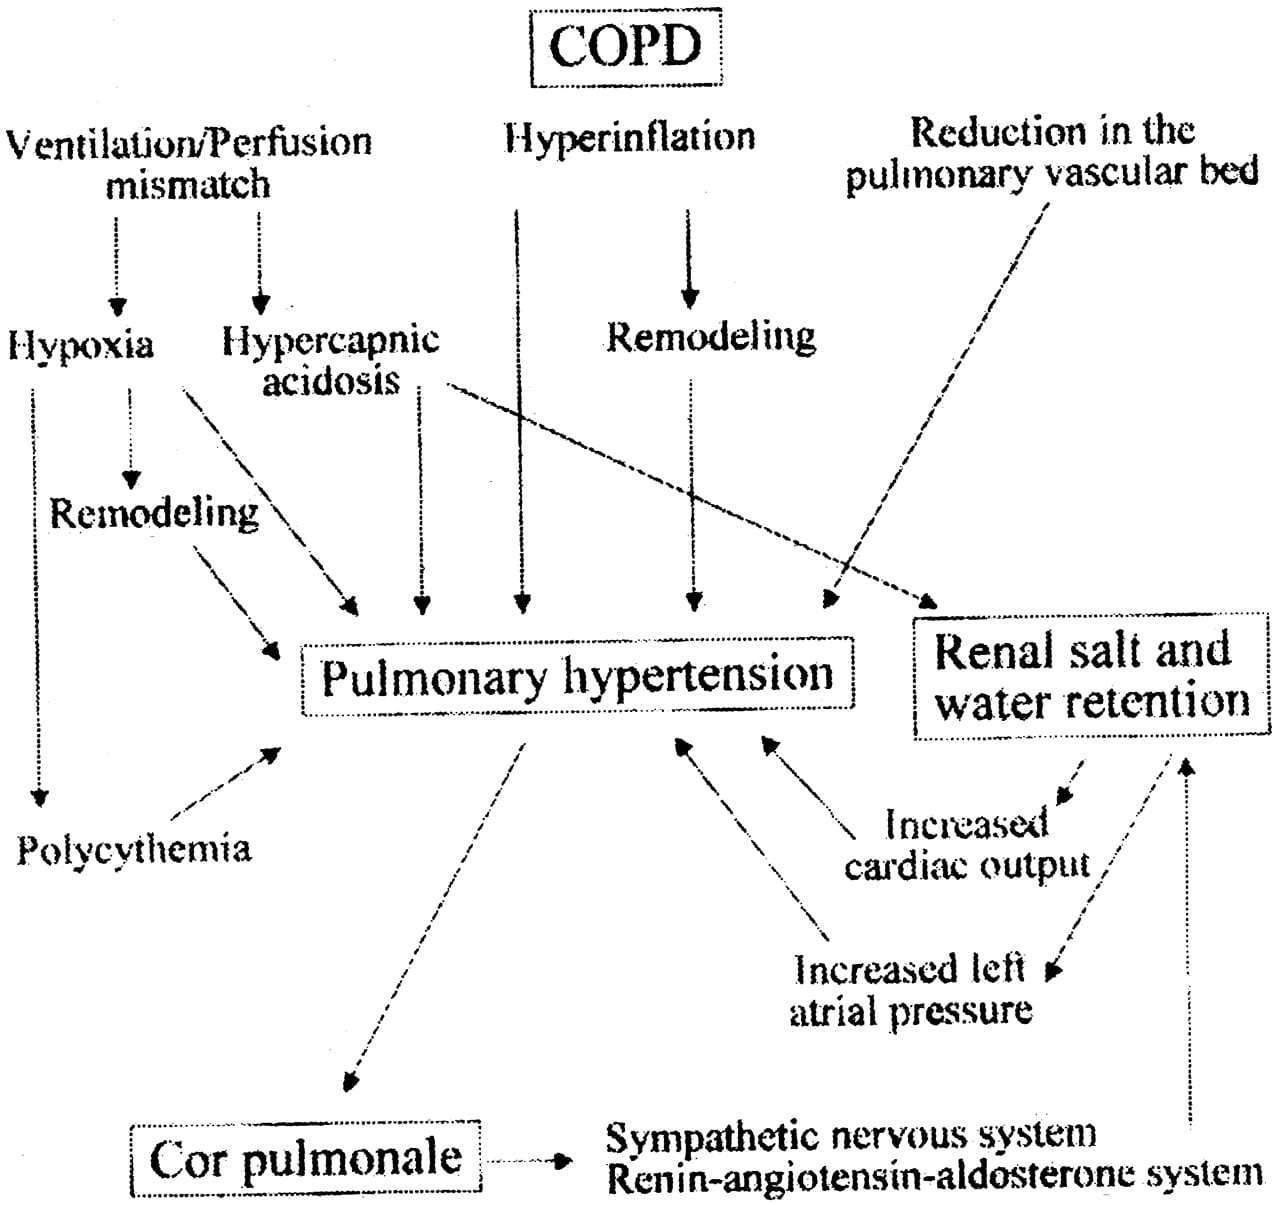 Doctors Gates: RIGHT VENTRICULAR FAILURE IN COPD